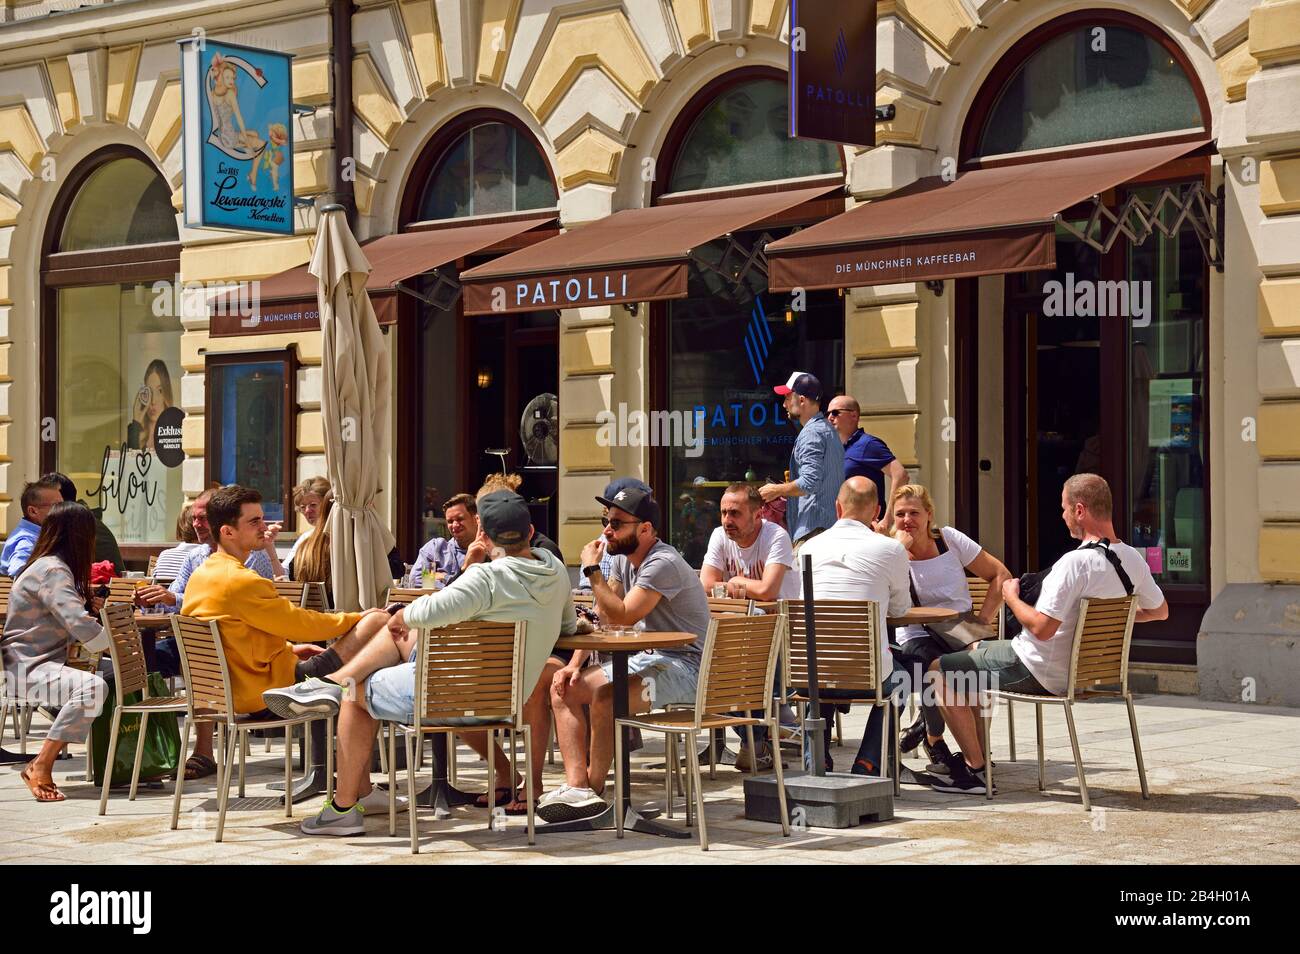 Europe, Germany, Bavaria, Munich, Old Town, Sendlinger Strasse, Old Town Houses, Patolli, The Munich Coffee Bar, Stock Photo